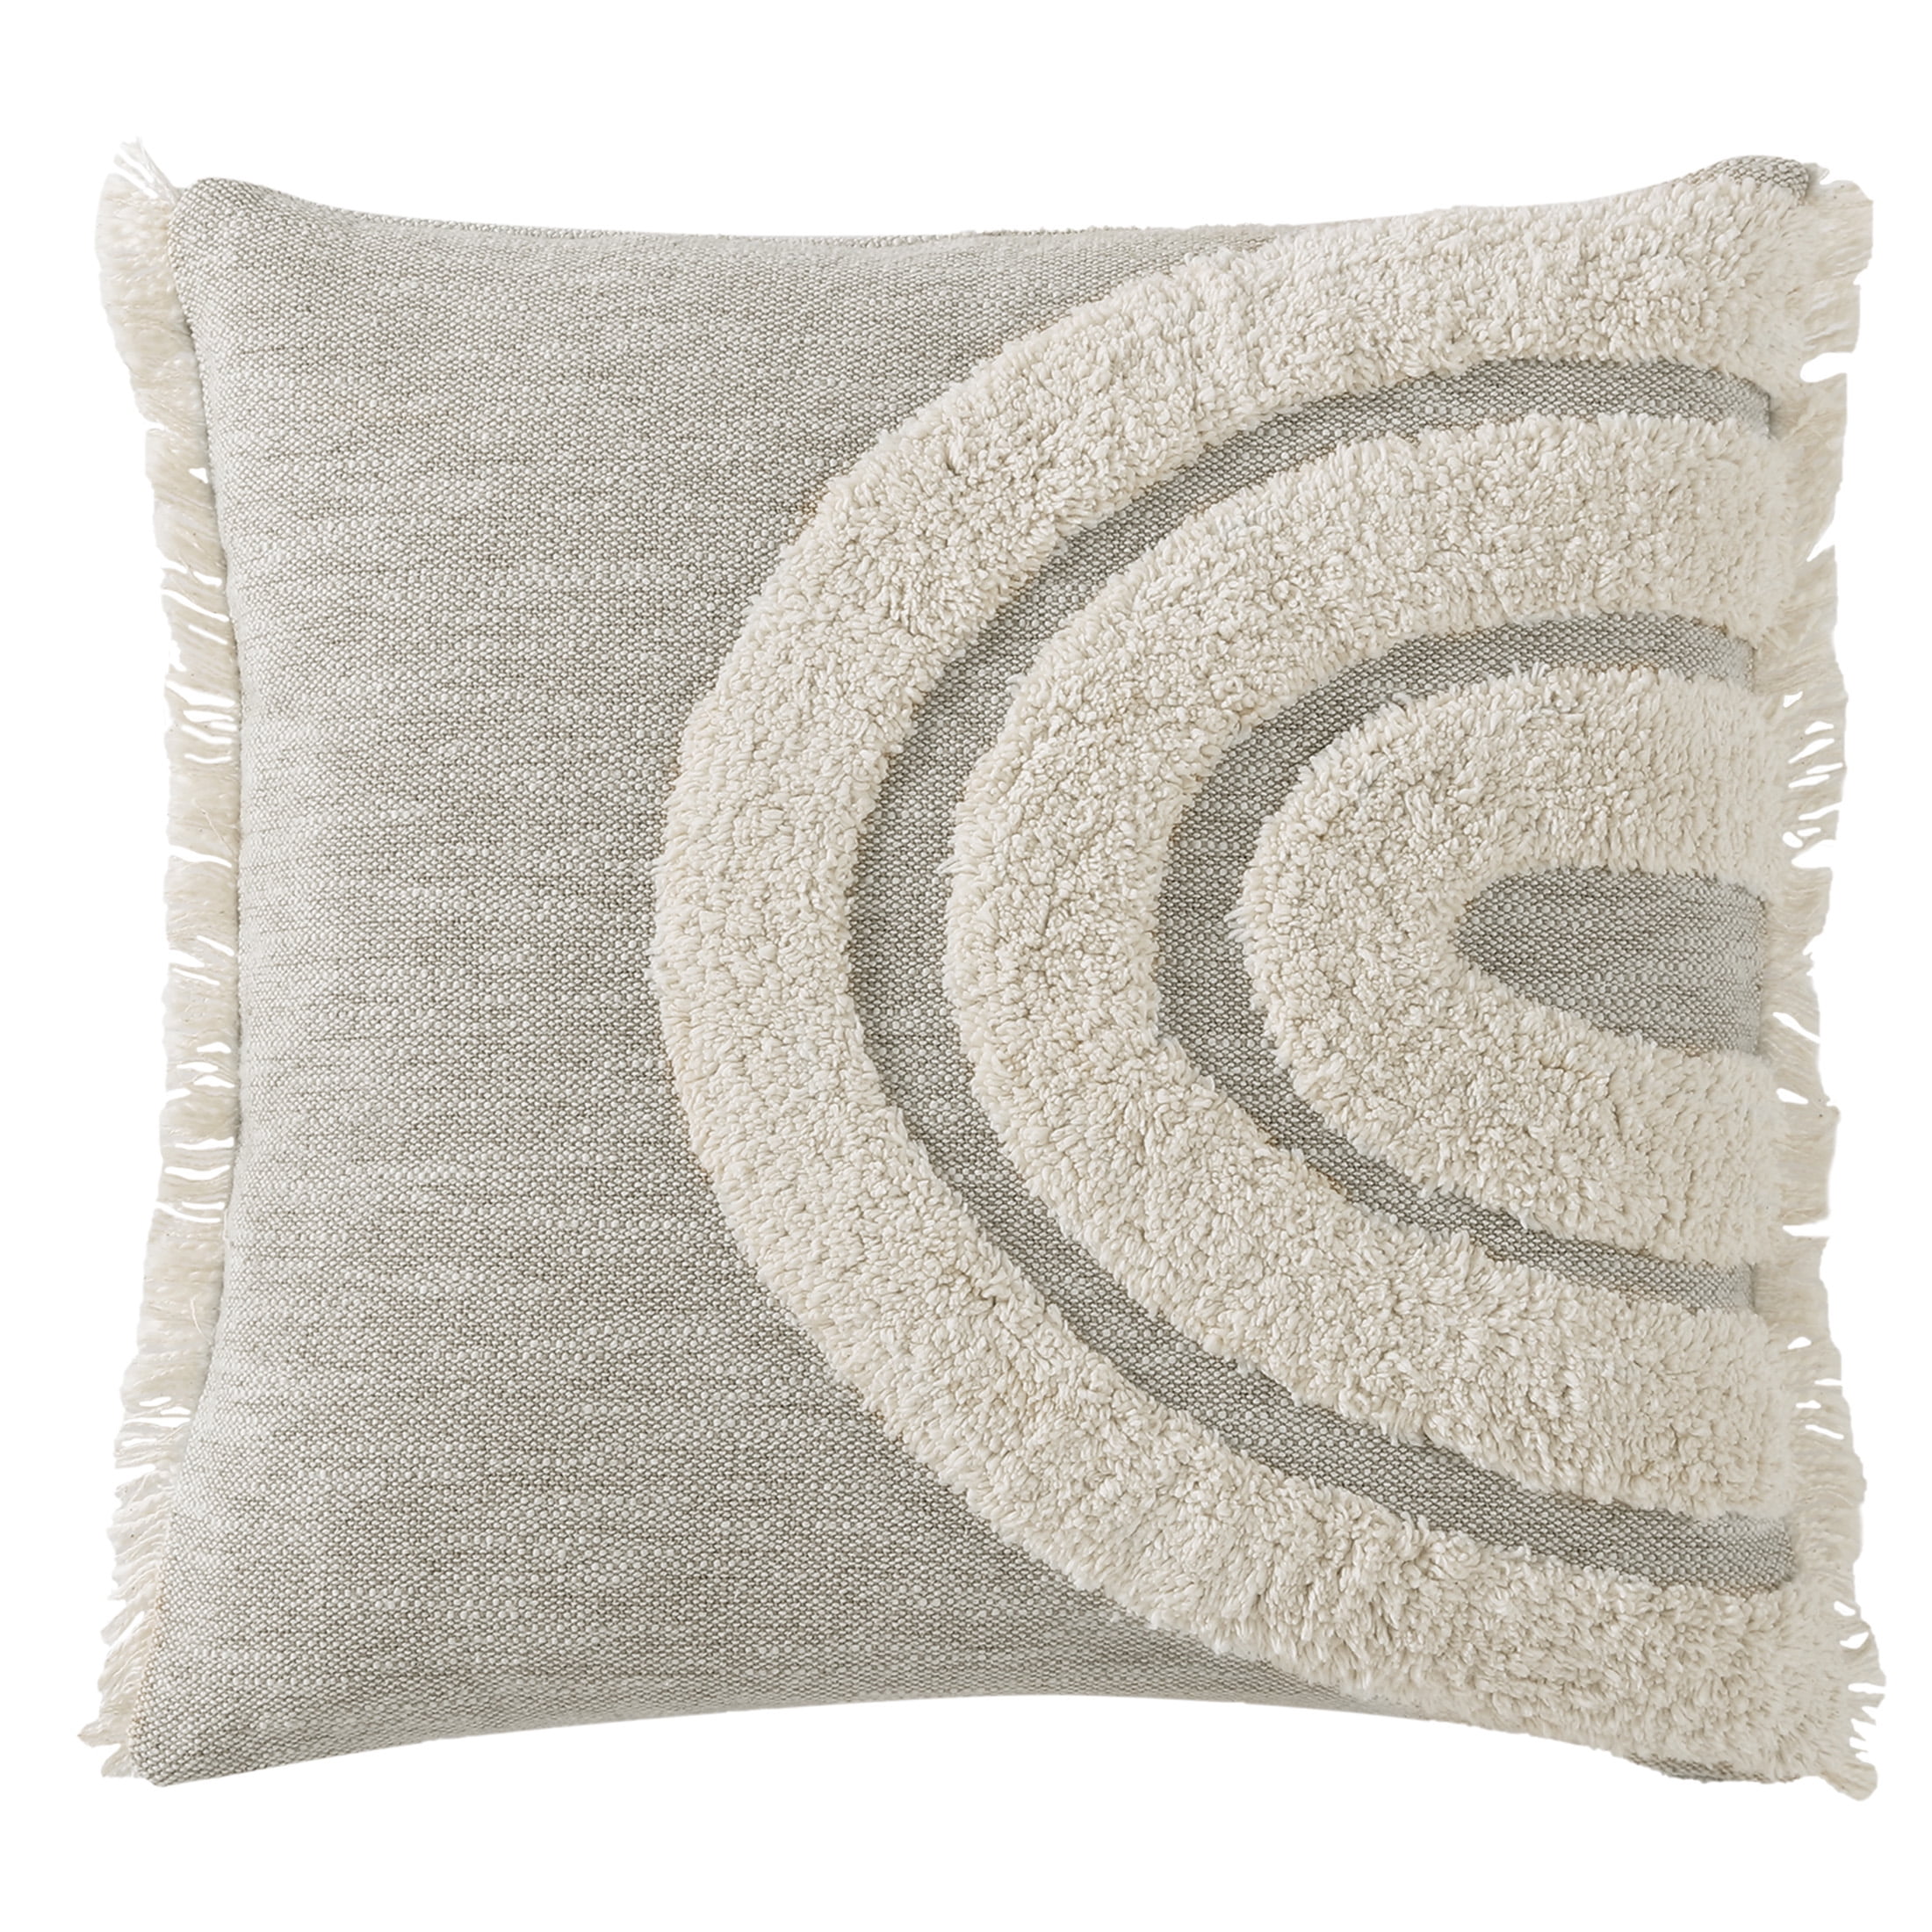 Better Homes & Gardens, Grey Arches Throw Pillow, Grey Stone, 20